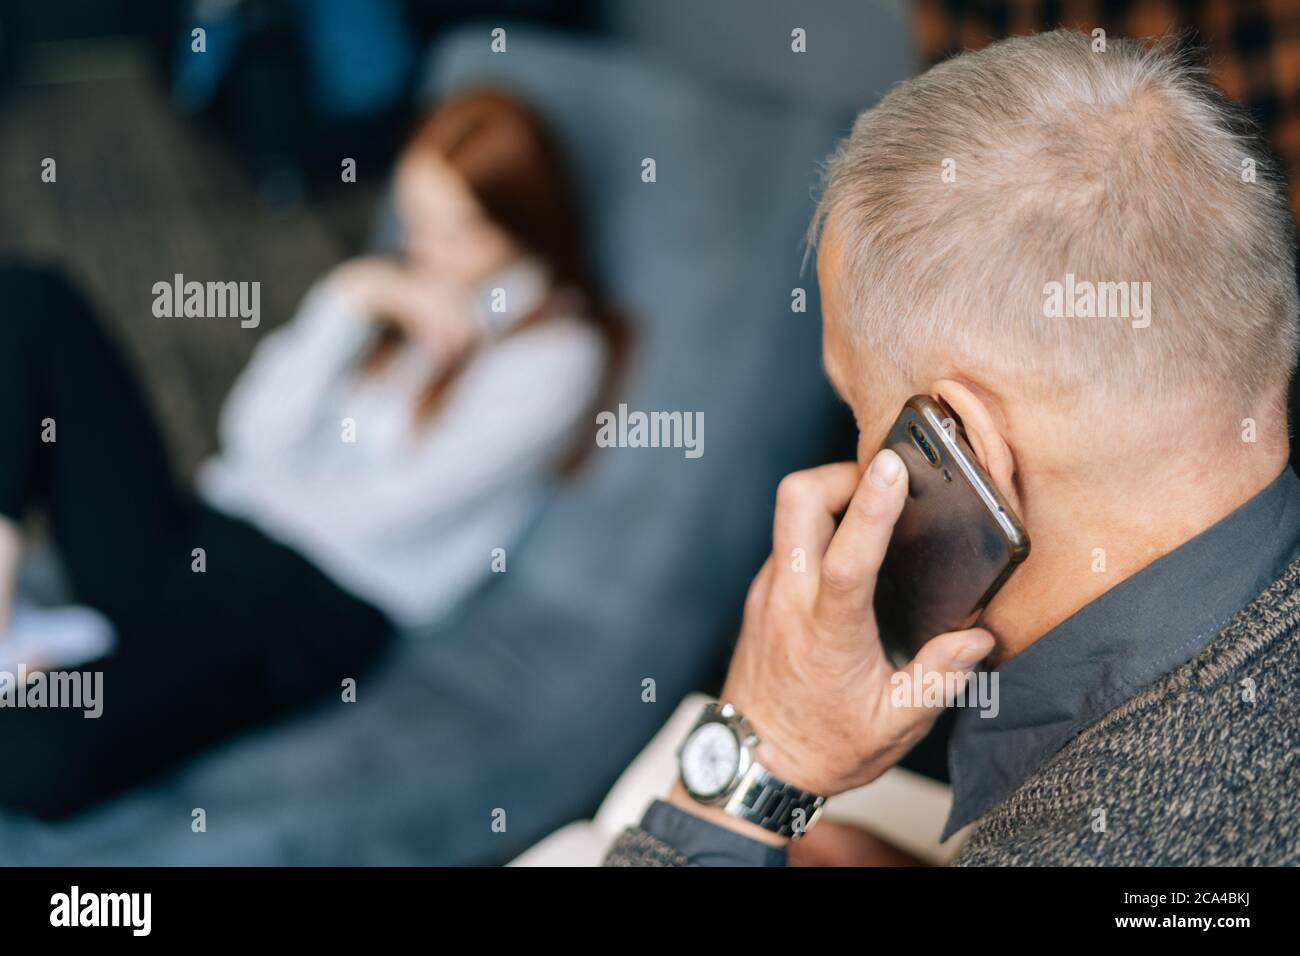 Close-up view of unrecognizable mature man talking on cell phone with friend client colleague. Stock Photo